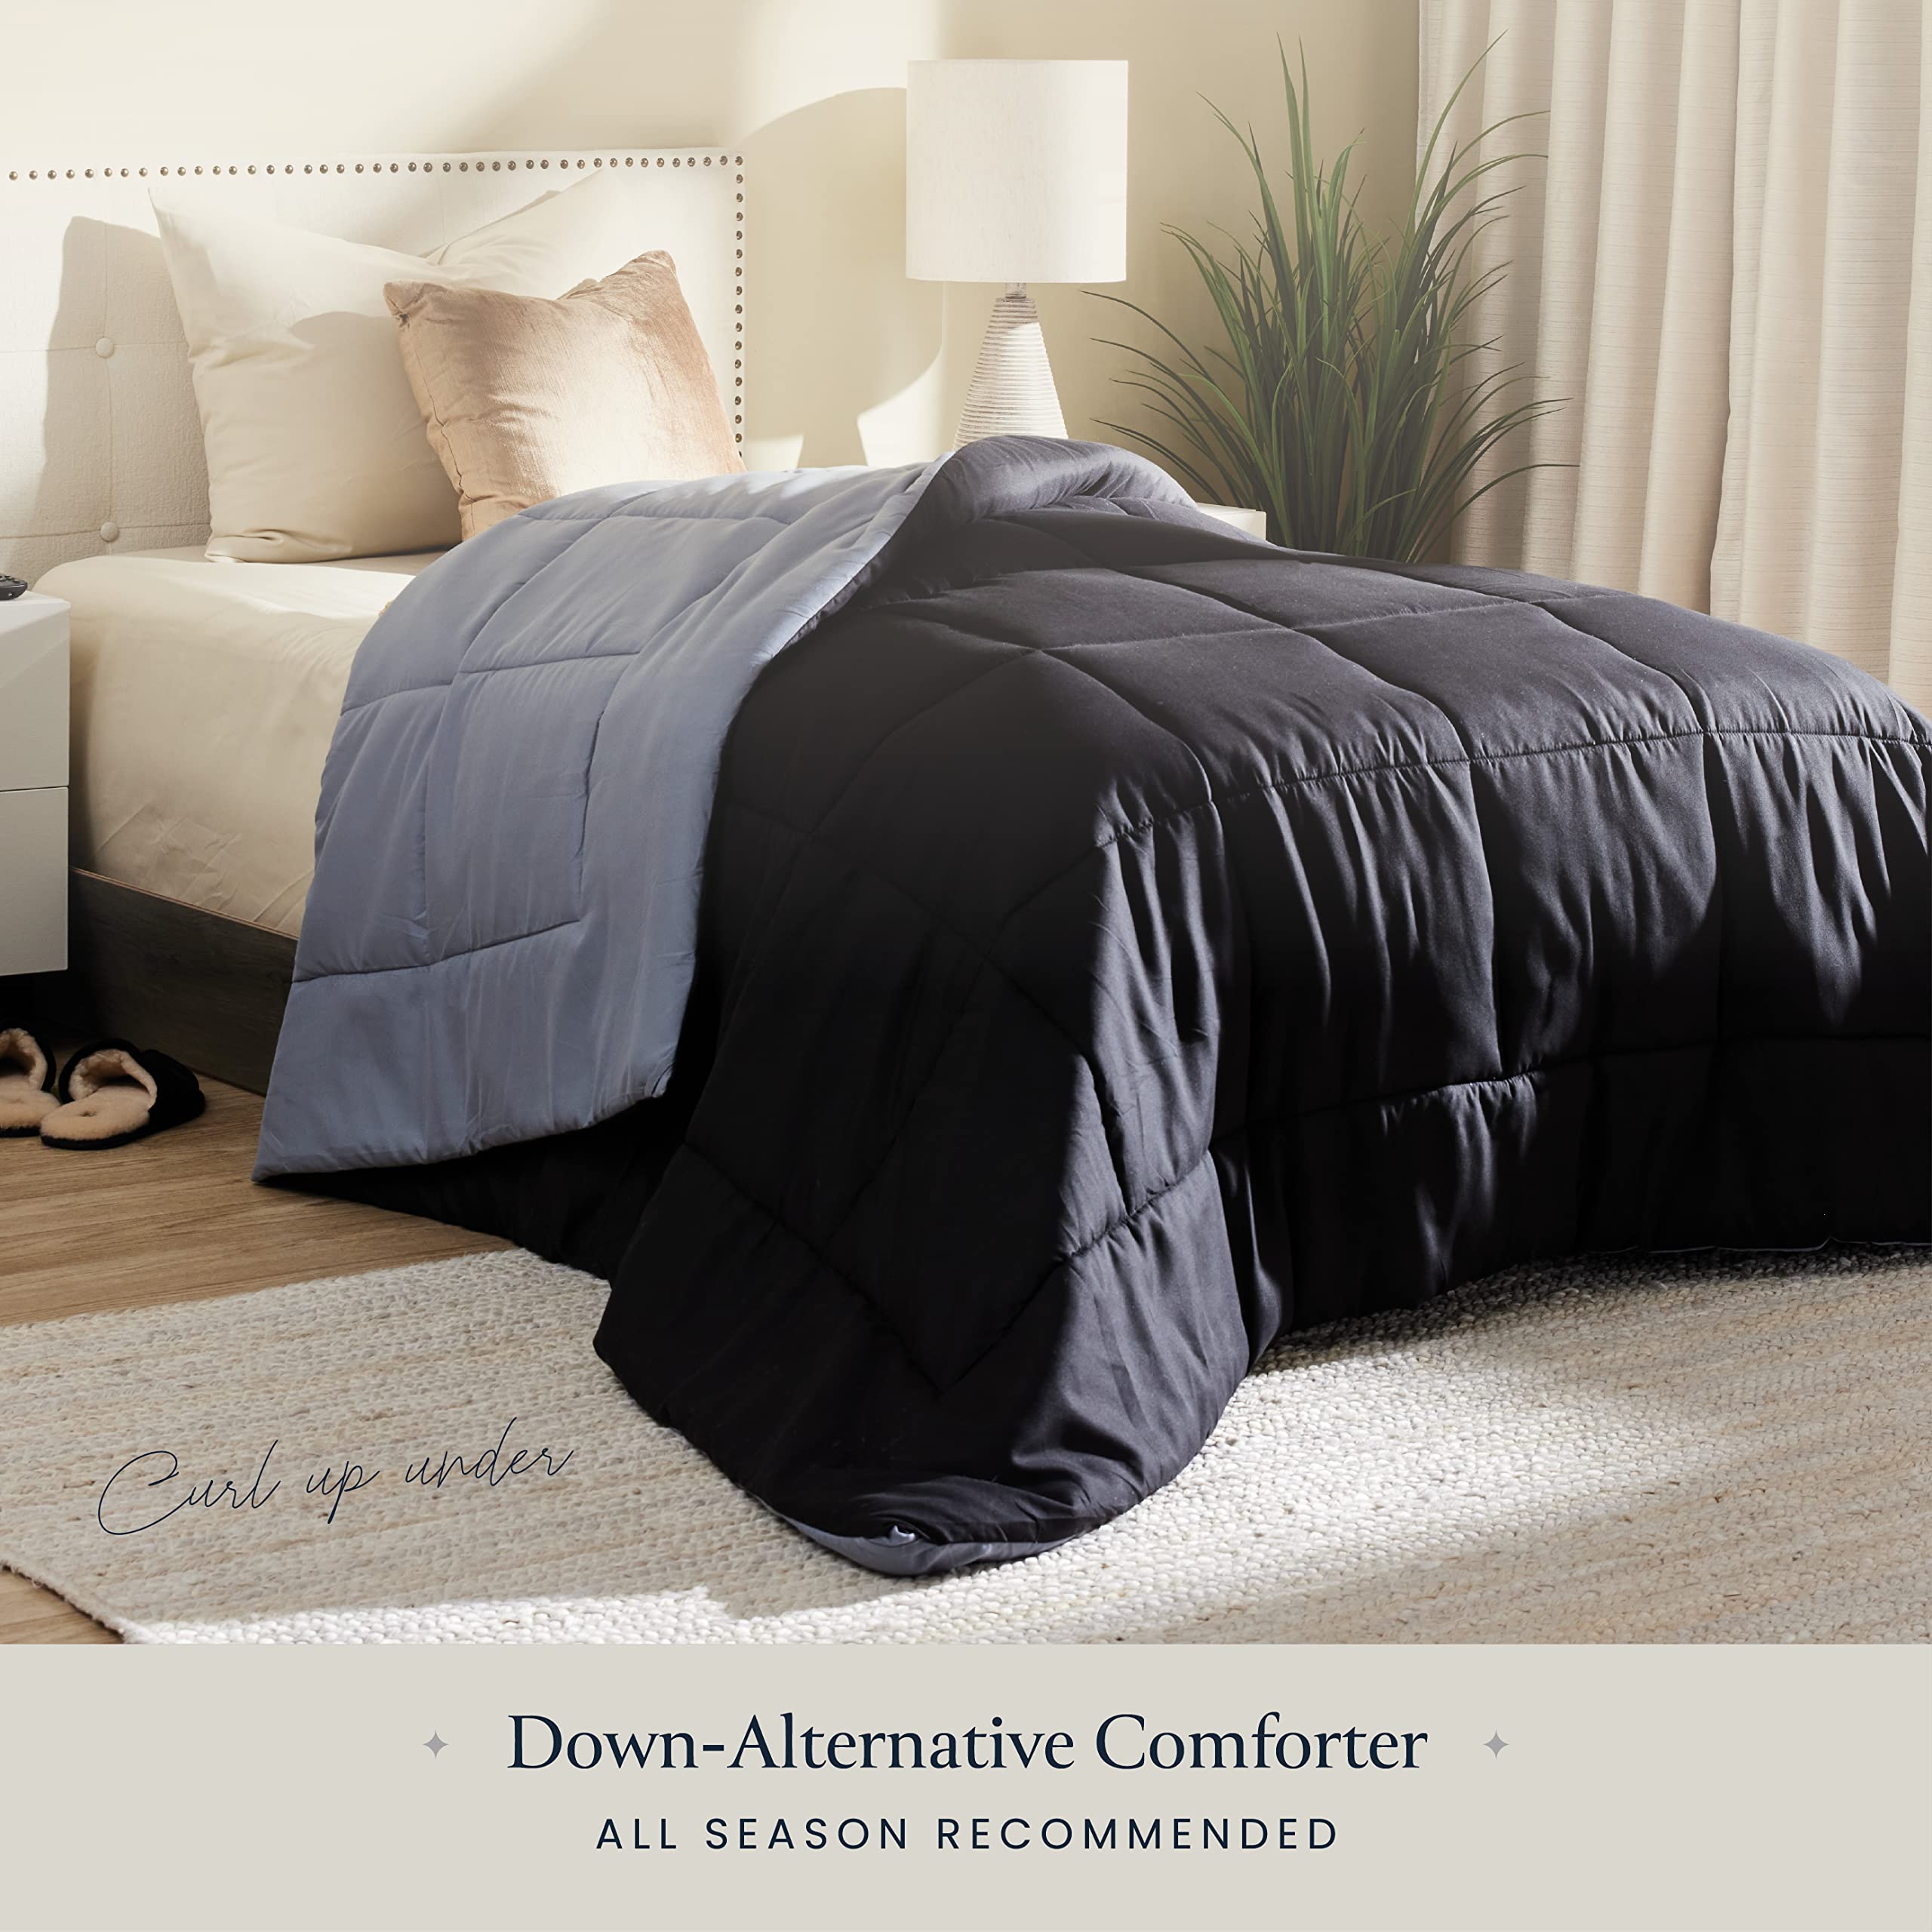 Down-Alternative Comforter Duvet Insert - All-Season Mid-Plush Cooling Comforter - Perfect for Hot Sleepers - Soft & Fluffy Bed Comforter, Elegant Box Quilted Comforters  - Good